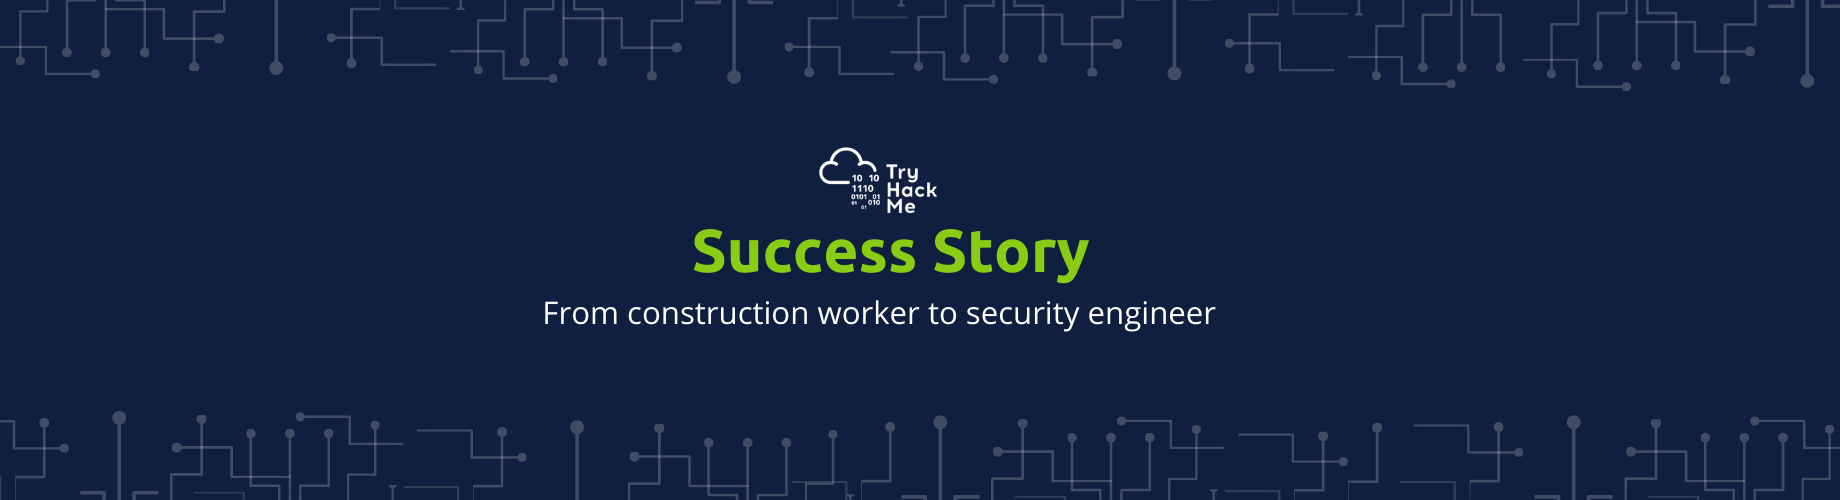 From Construction Worker to Security Engineer